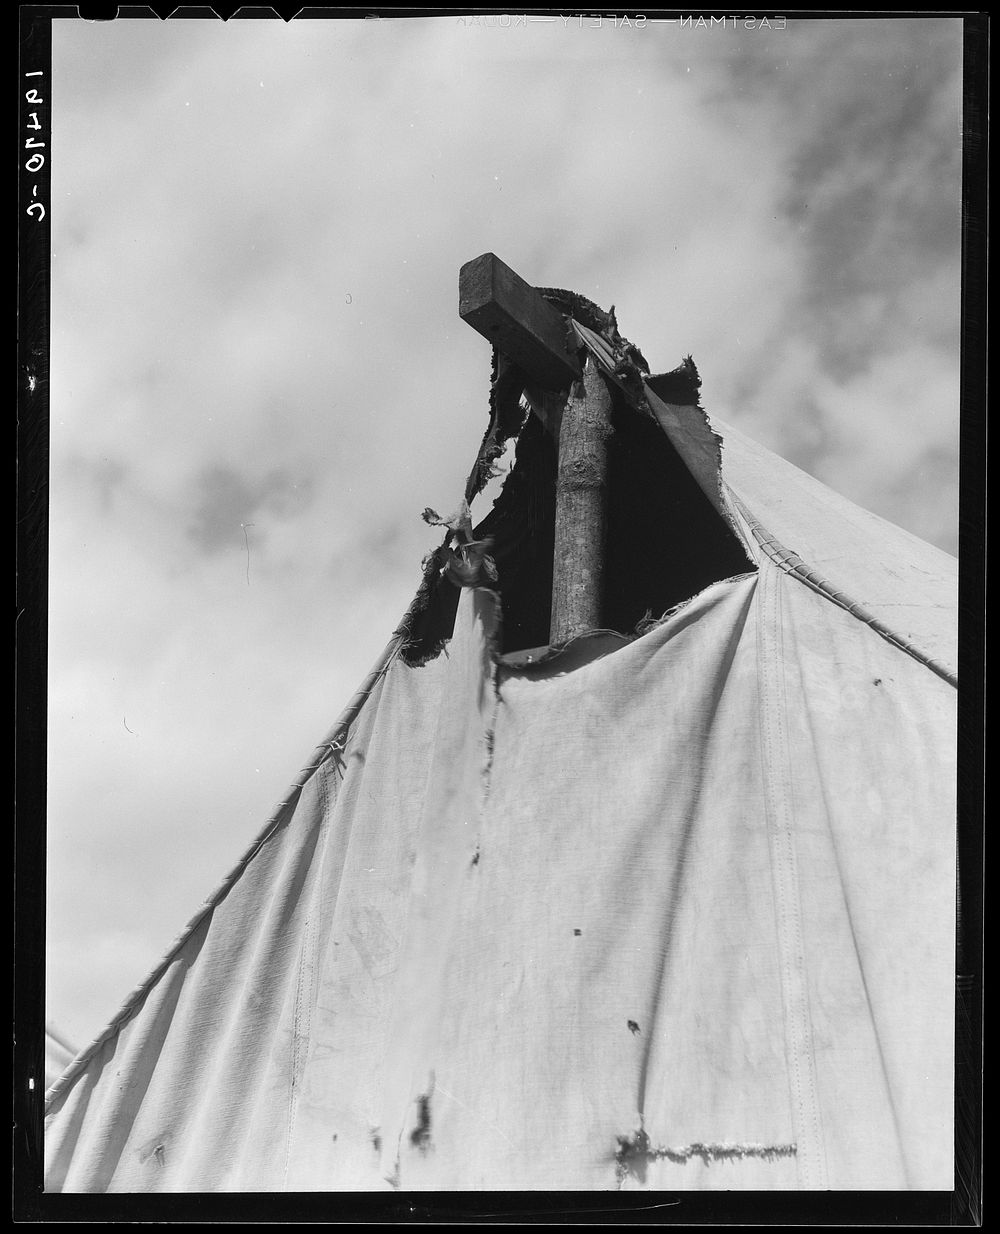 Pea picker's tent near San Jose, California. Sourced from the Library of Congress.